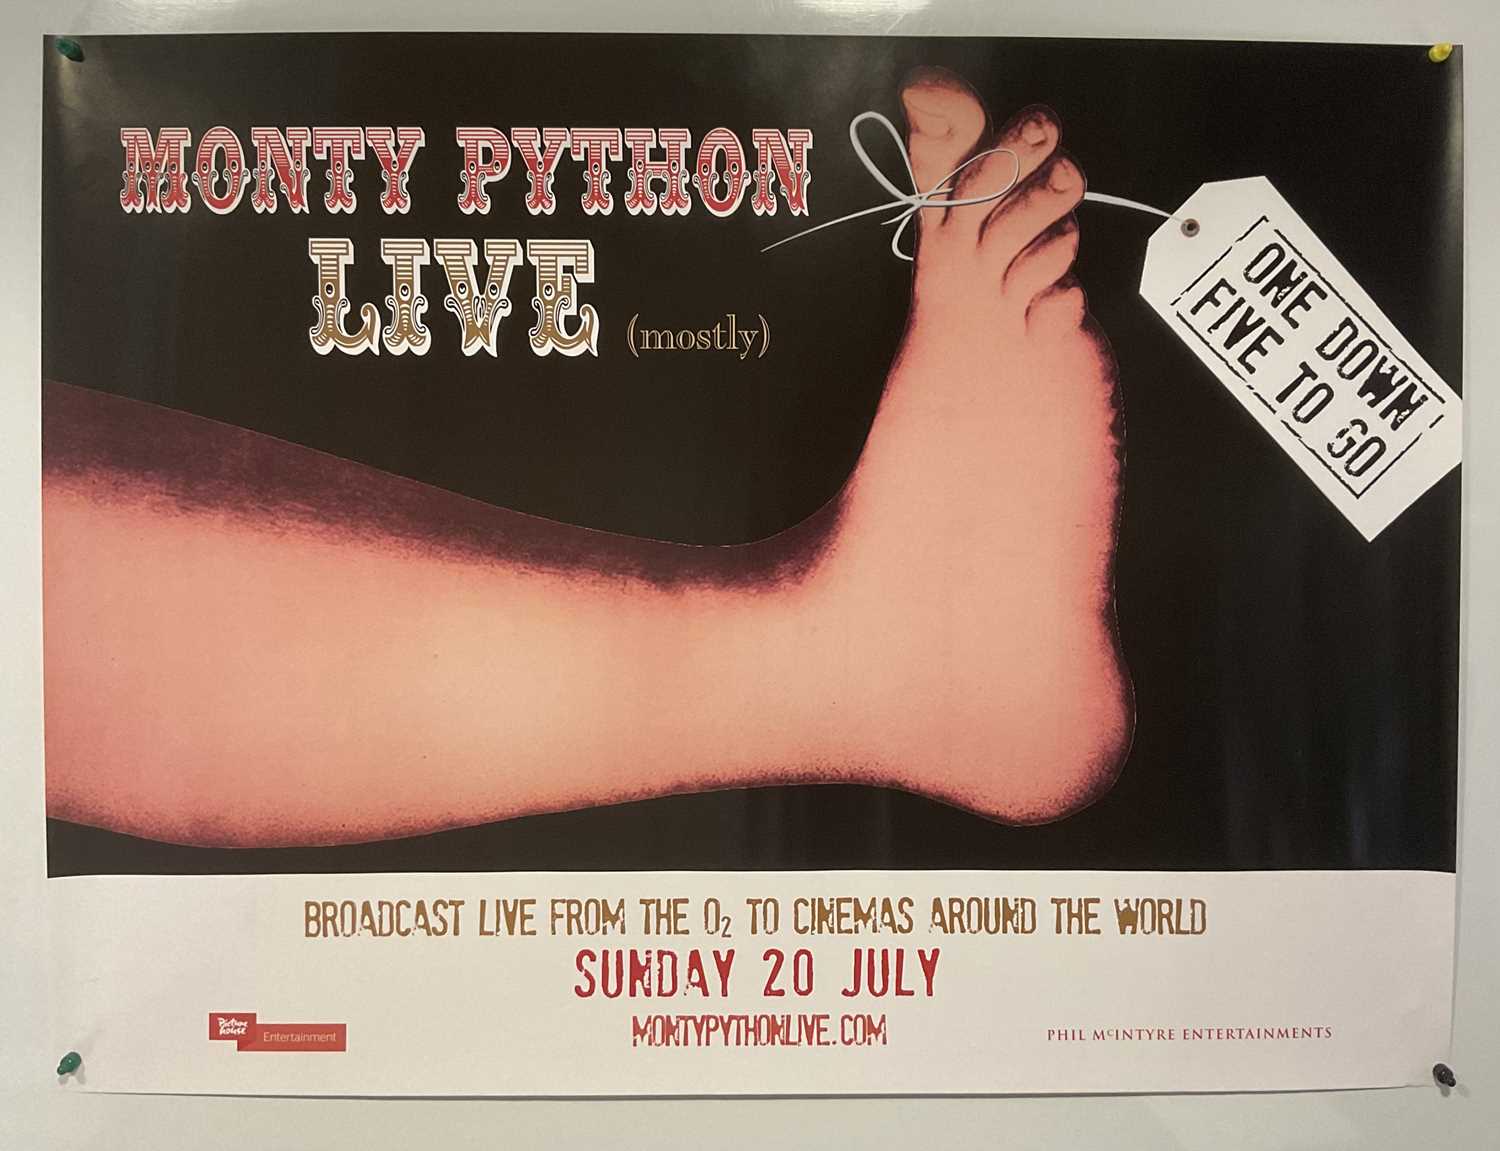 MONTY PYTHON LIVE (MOSTLY) (2014) 2 UK Quad double-sided film posters, two different styles, artwork - Image 3 of 3